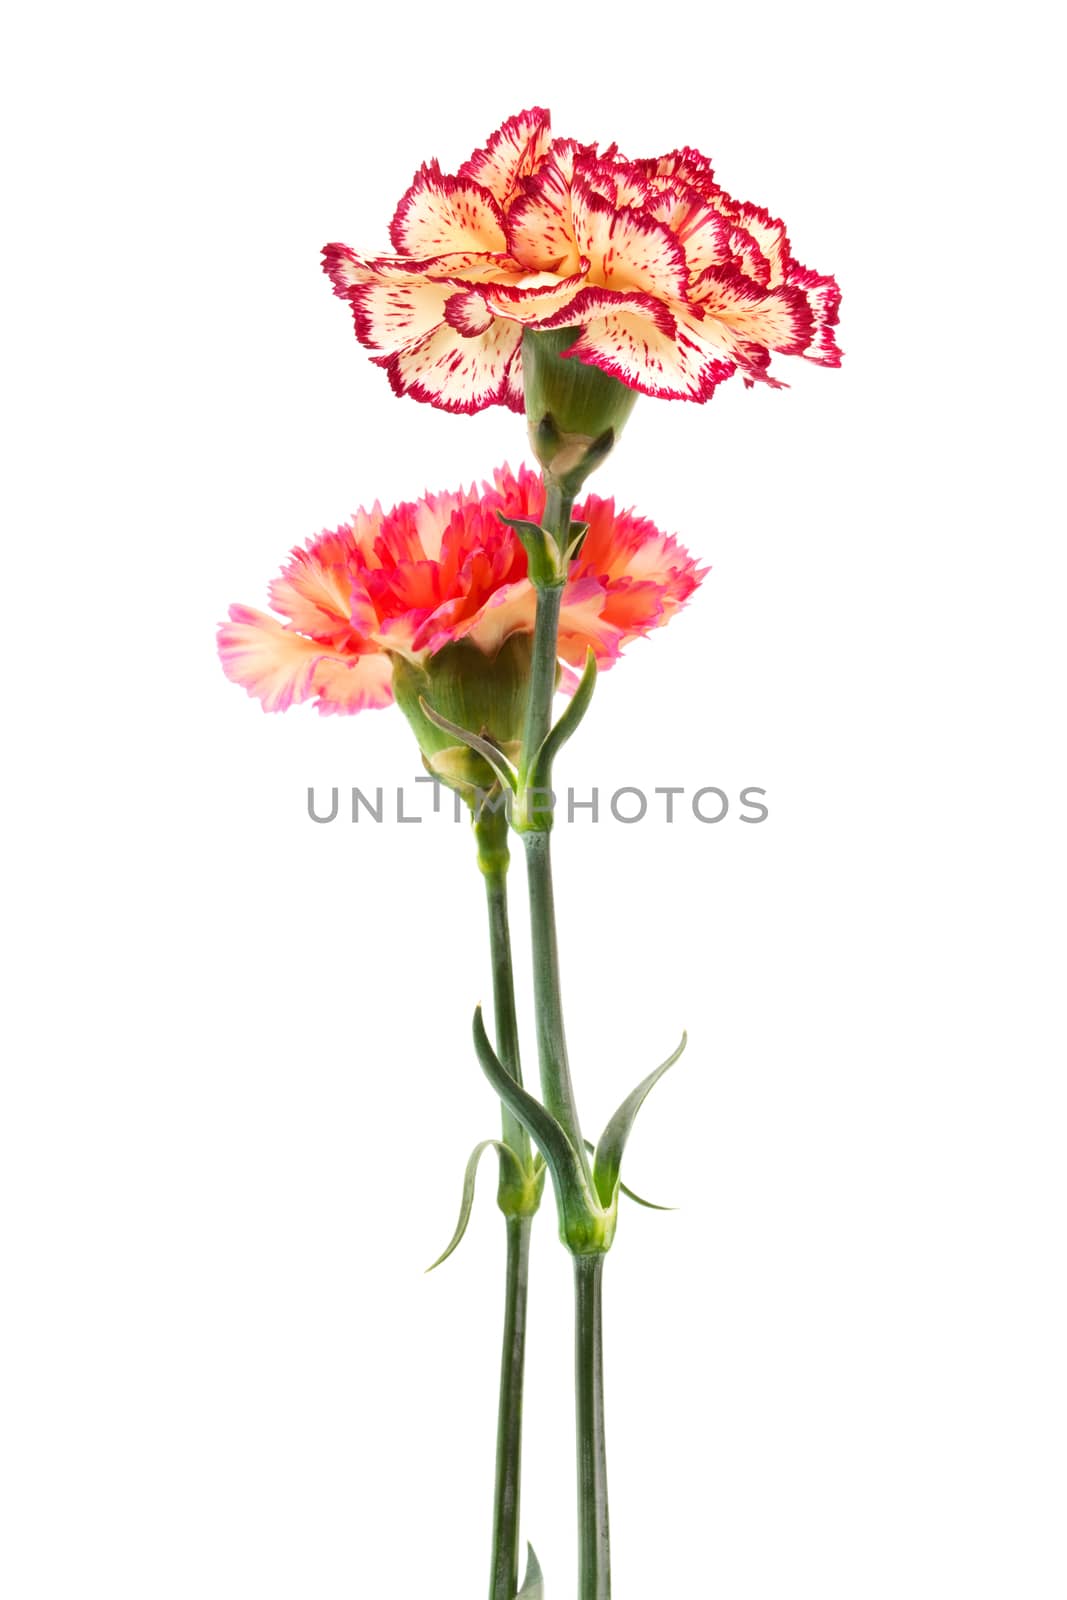 Beautiful two carnation on a white background